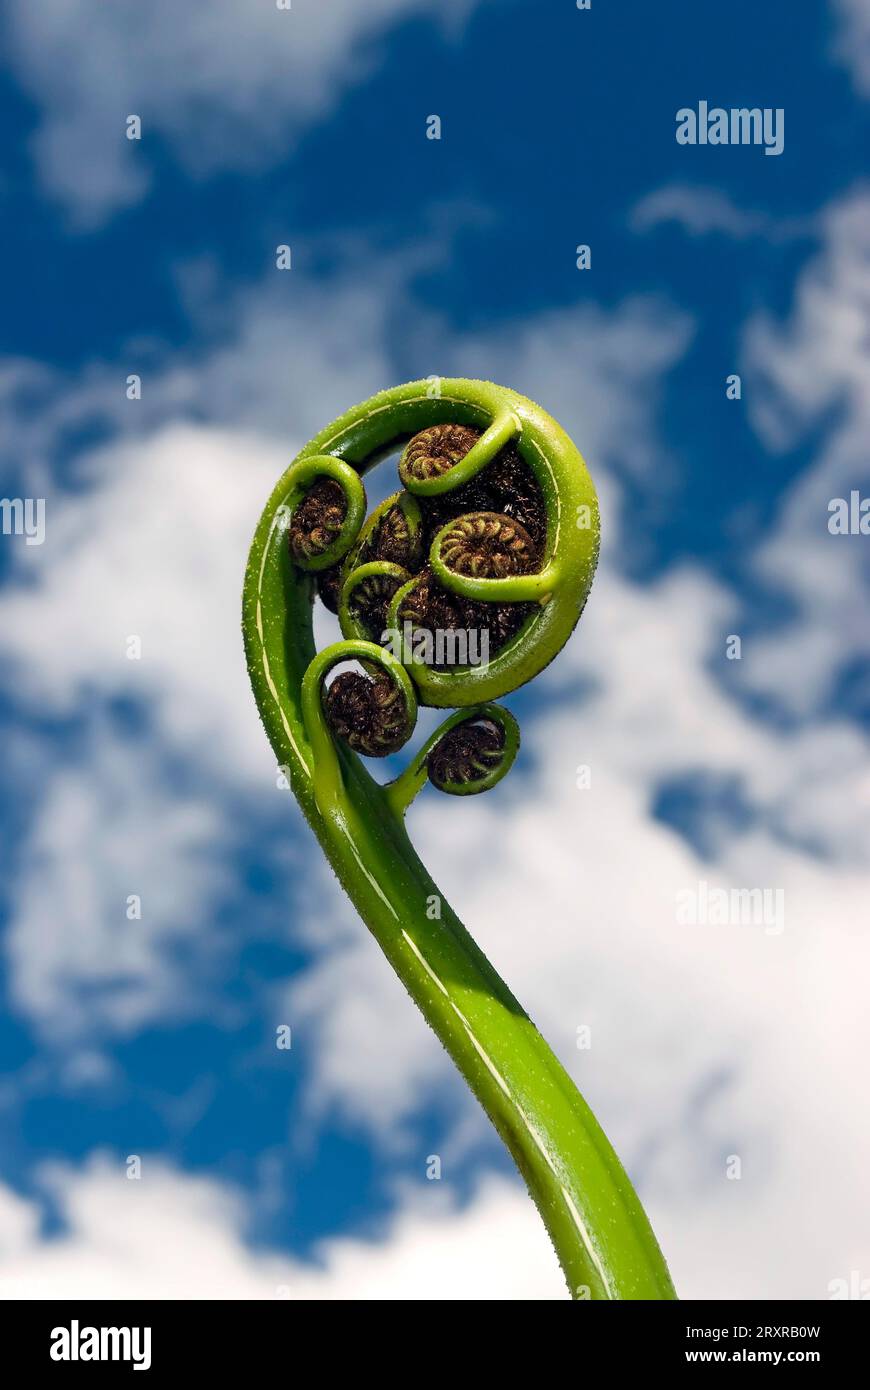 New shoot of fern frond on New Zealand tree fern. The koru (Māori for 'loop or coil') is a spiral shape based on the new unfurling frond Stock Photo